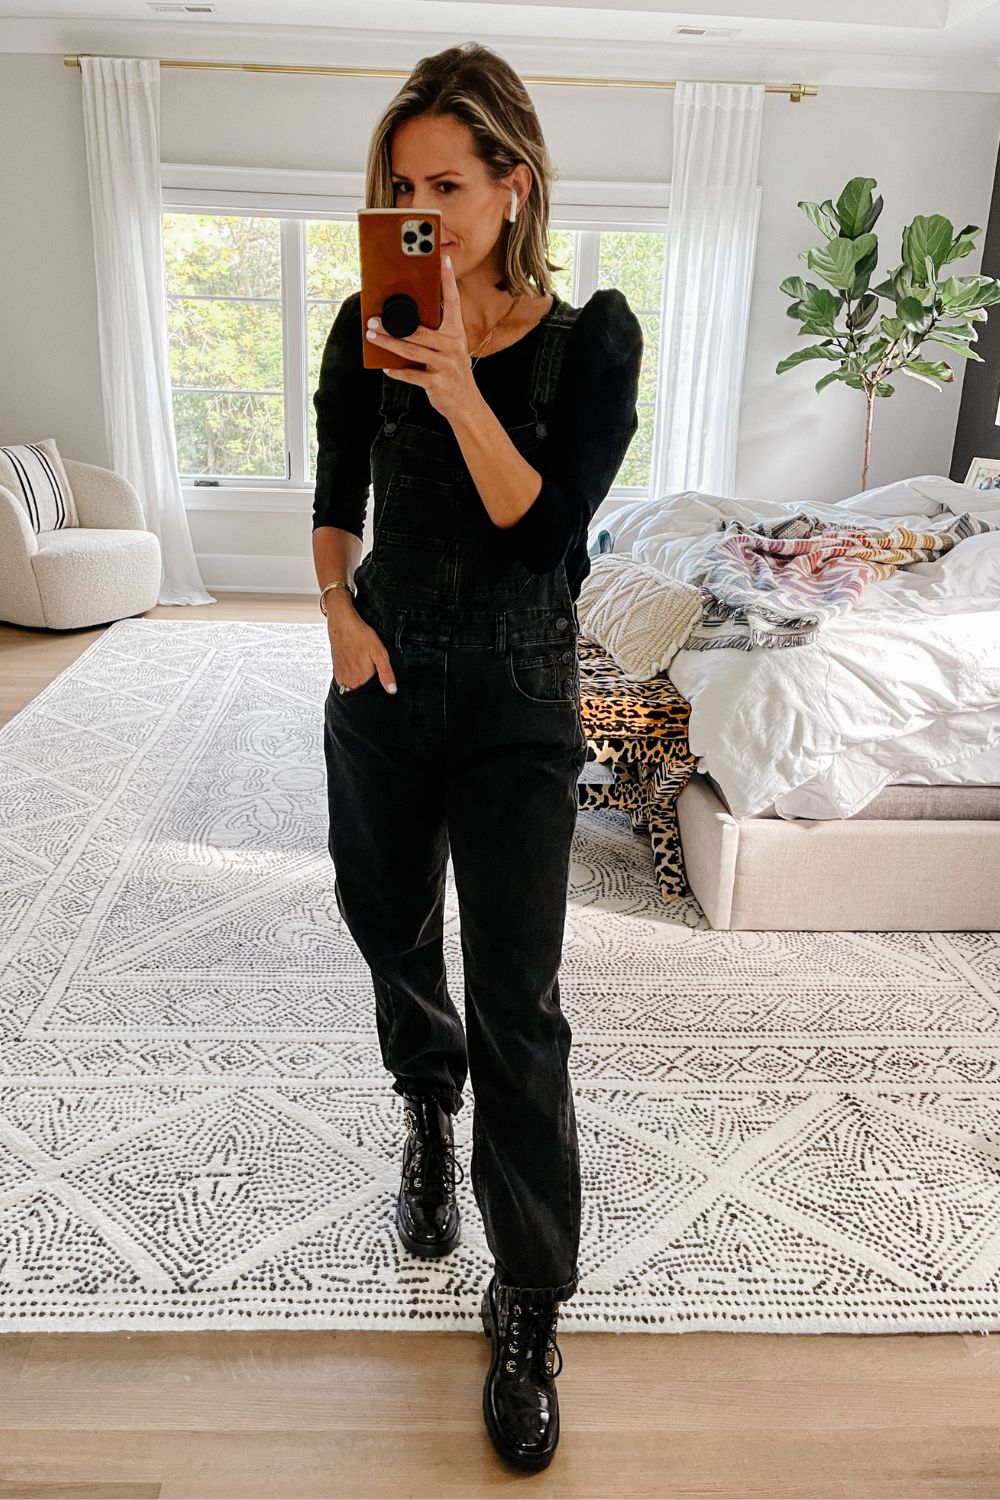 Suzanne wearing black overalls and a puff sleeve top